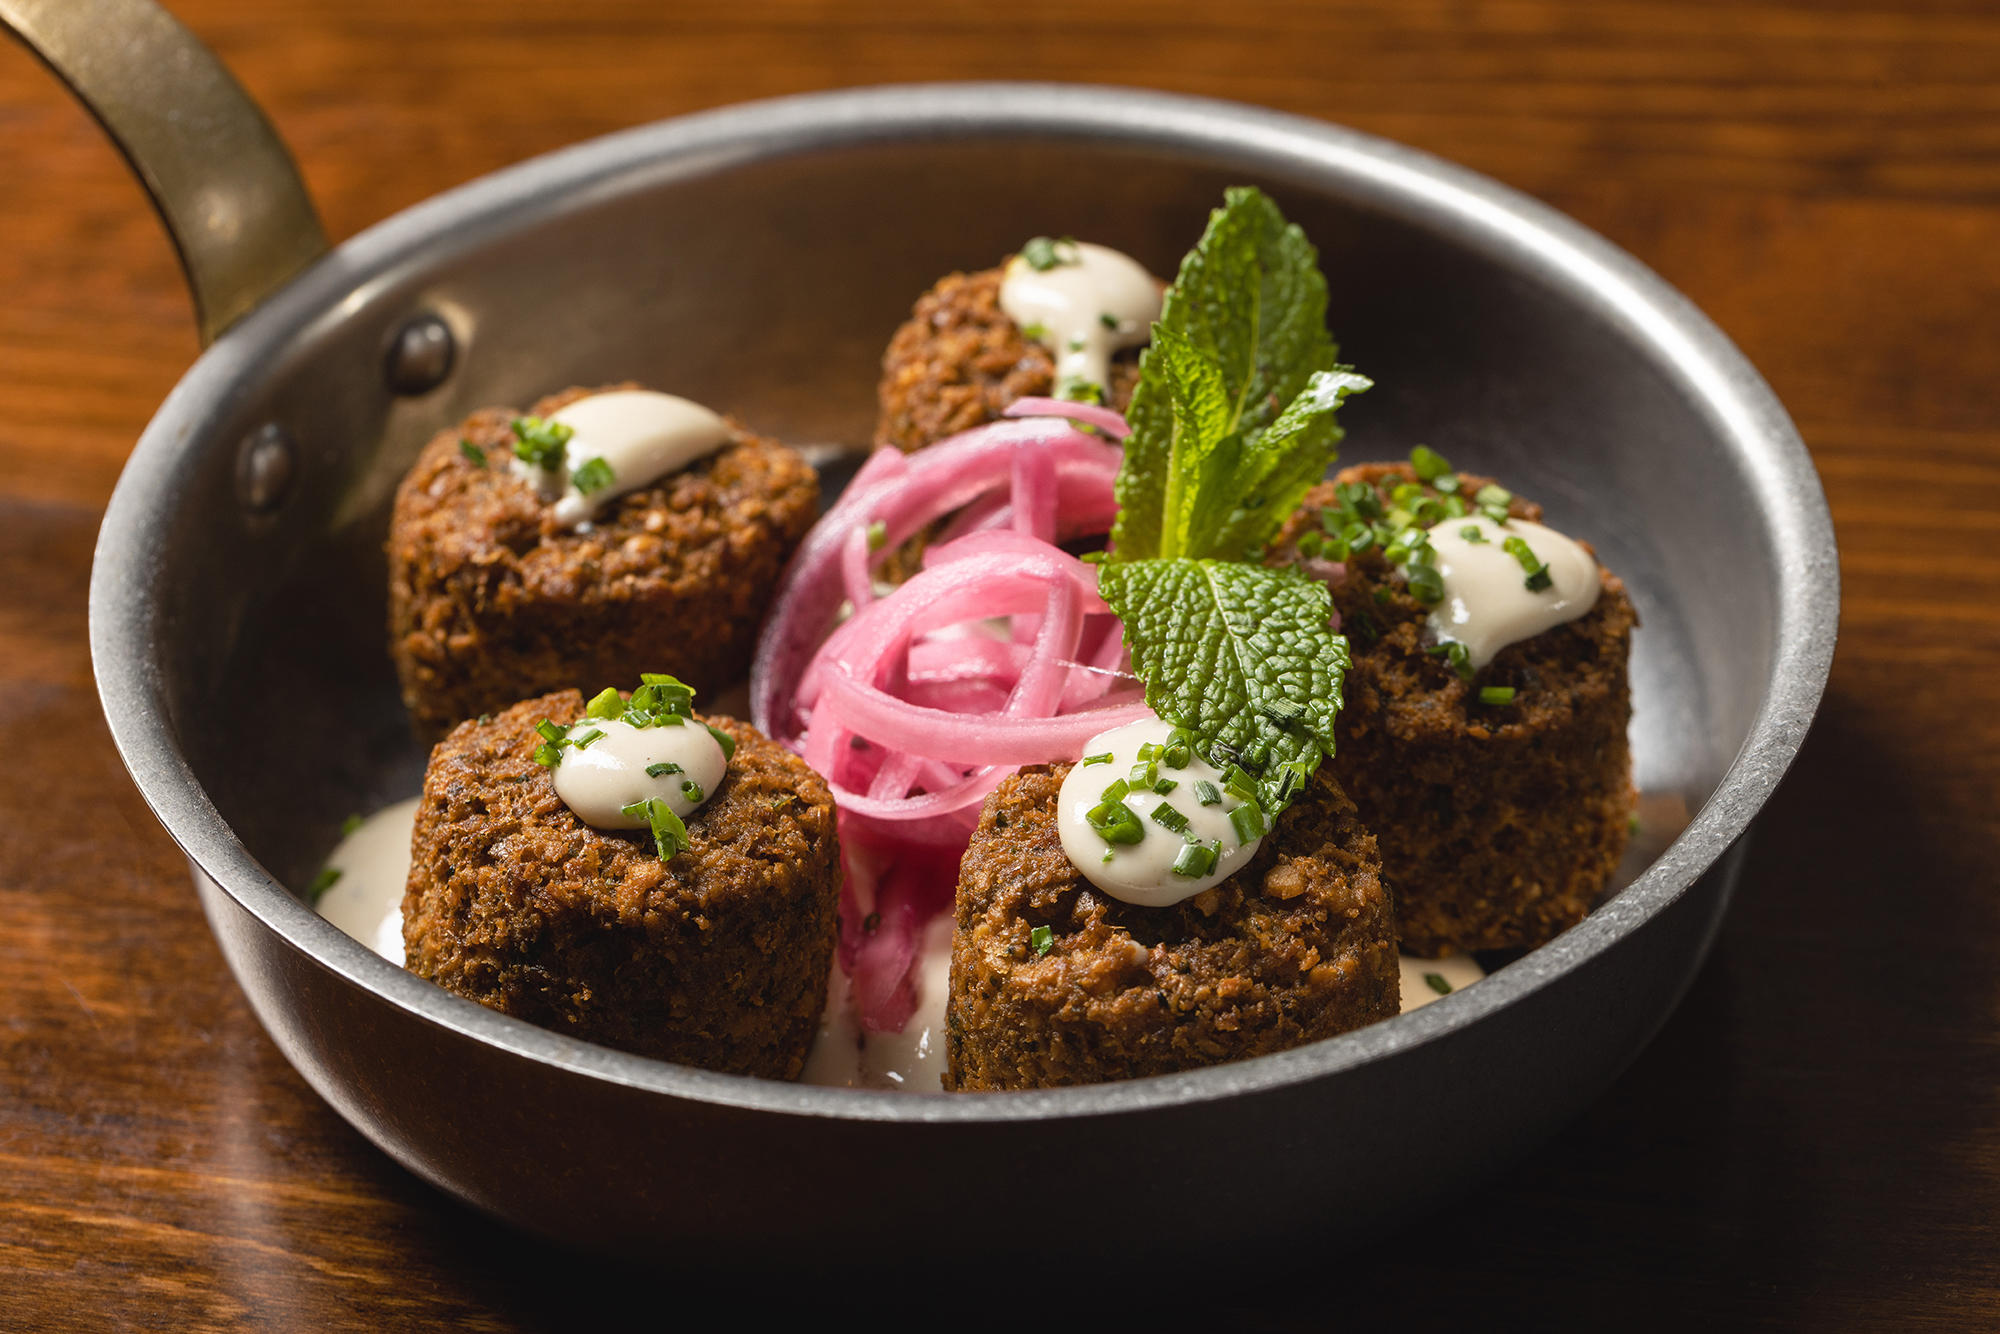 Share The Independent's Falafel Tots with the table in Midtown Manhattan